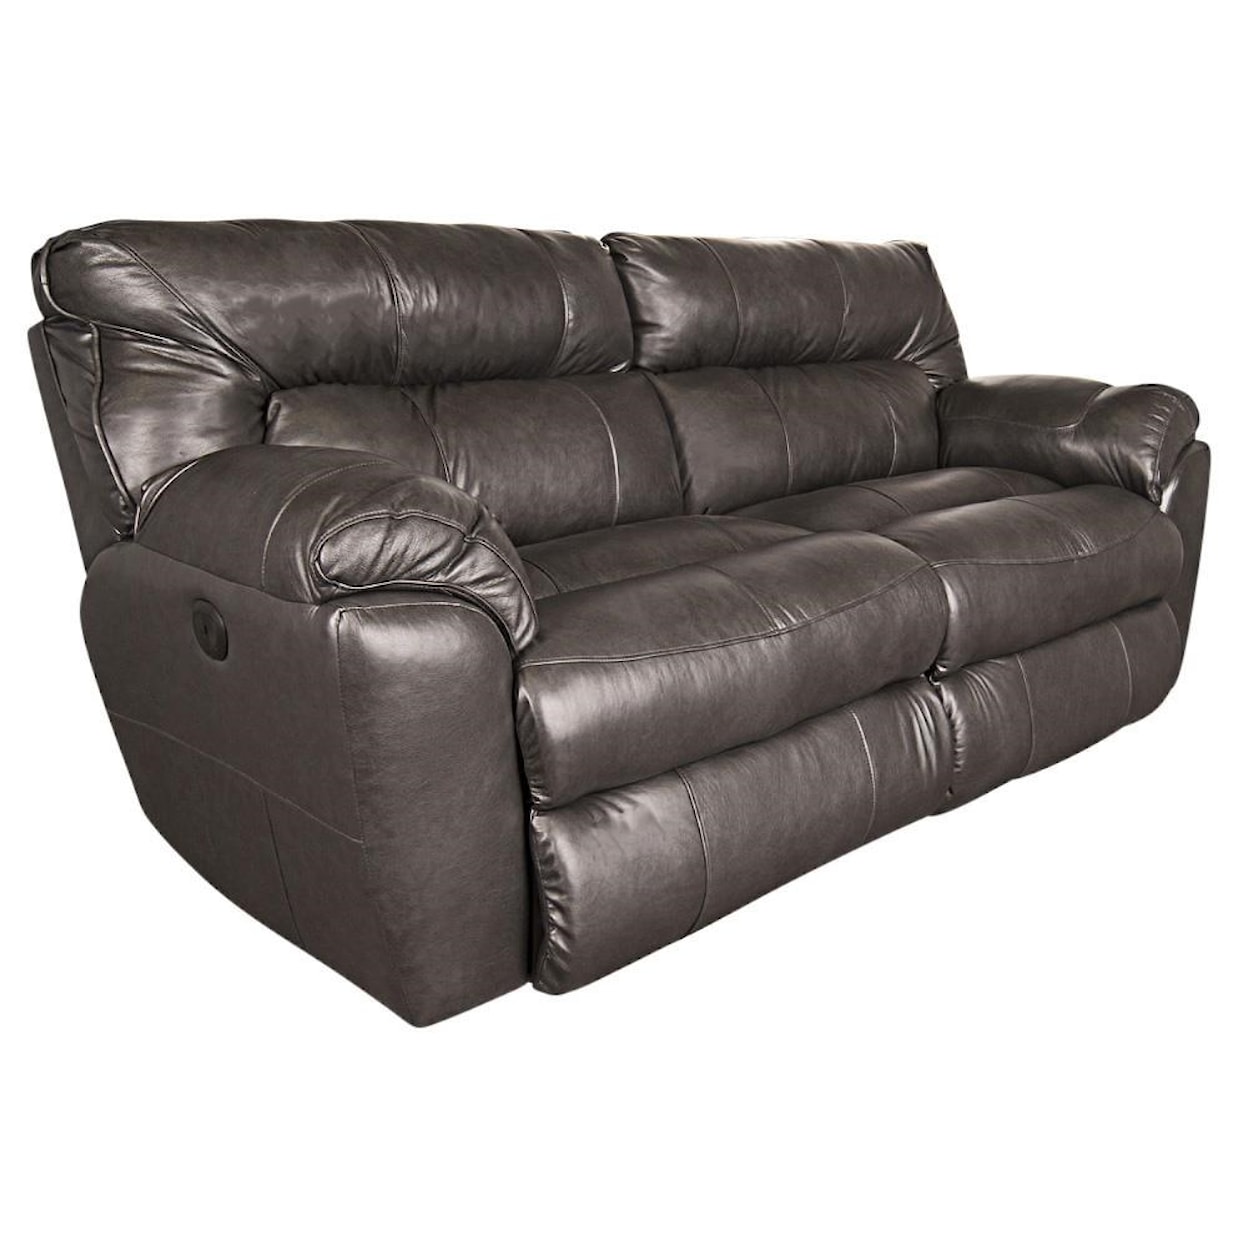 Klaussner Ronna Ronna Leather Match Power Sofa